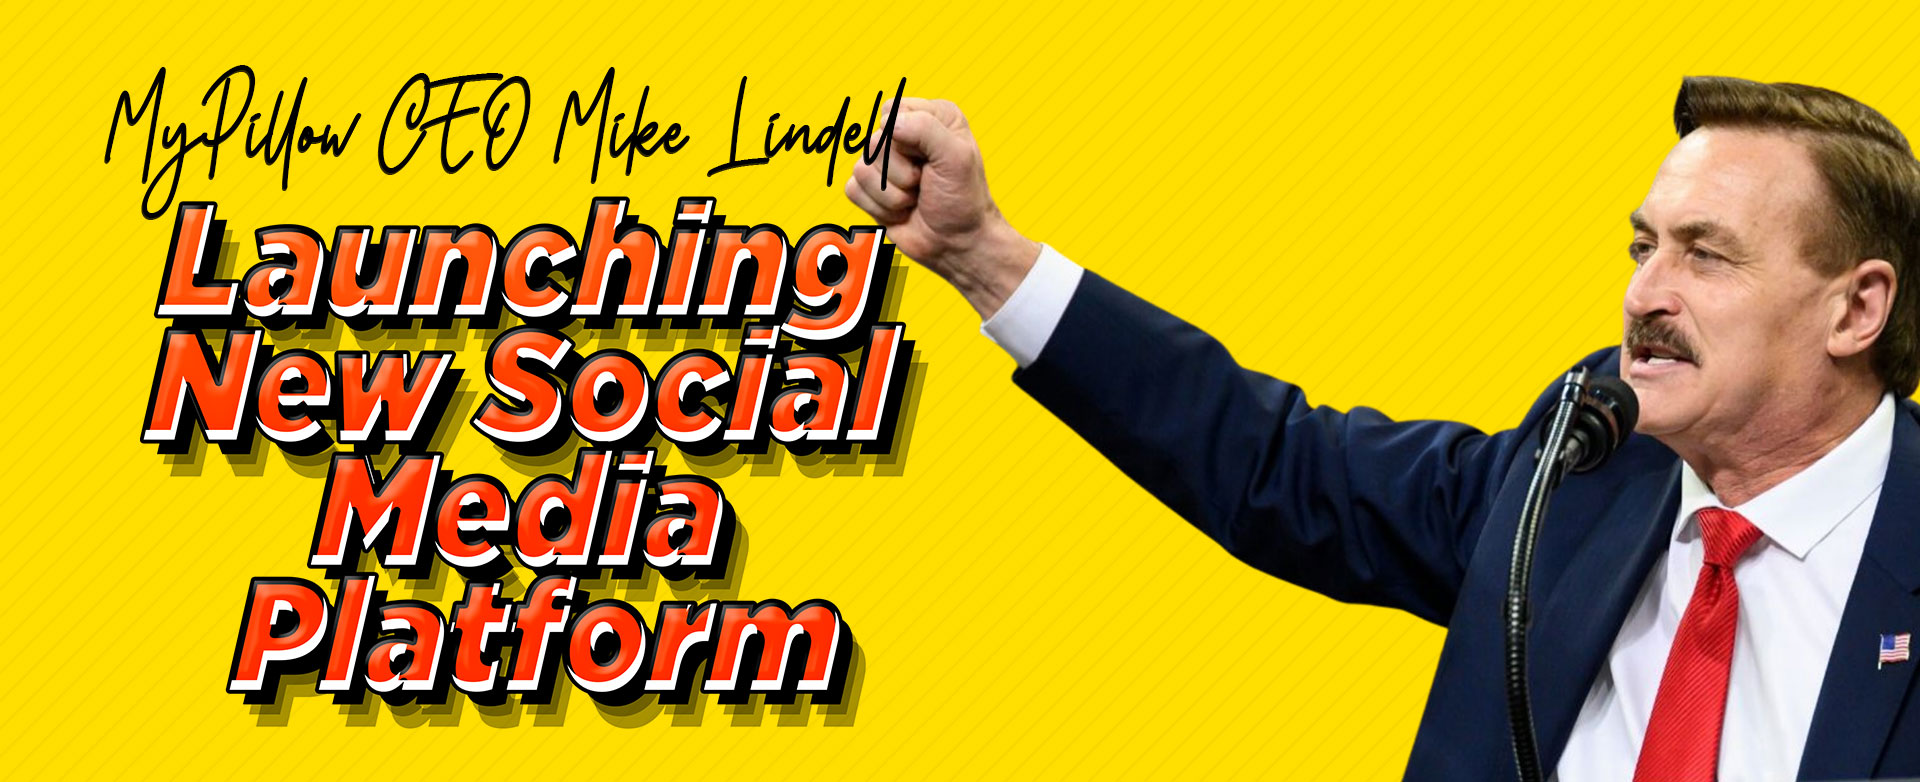 MyPatriotsNetwork-MyPillow CEO Mike Lindell Announces He’s Launching New Social Media Platform